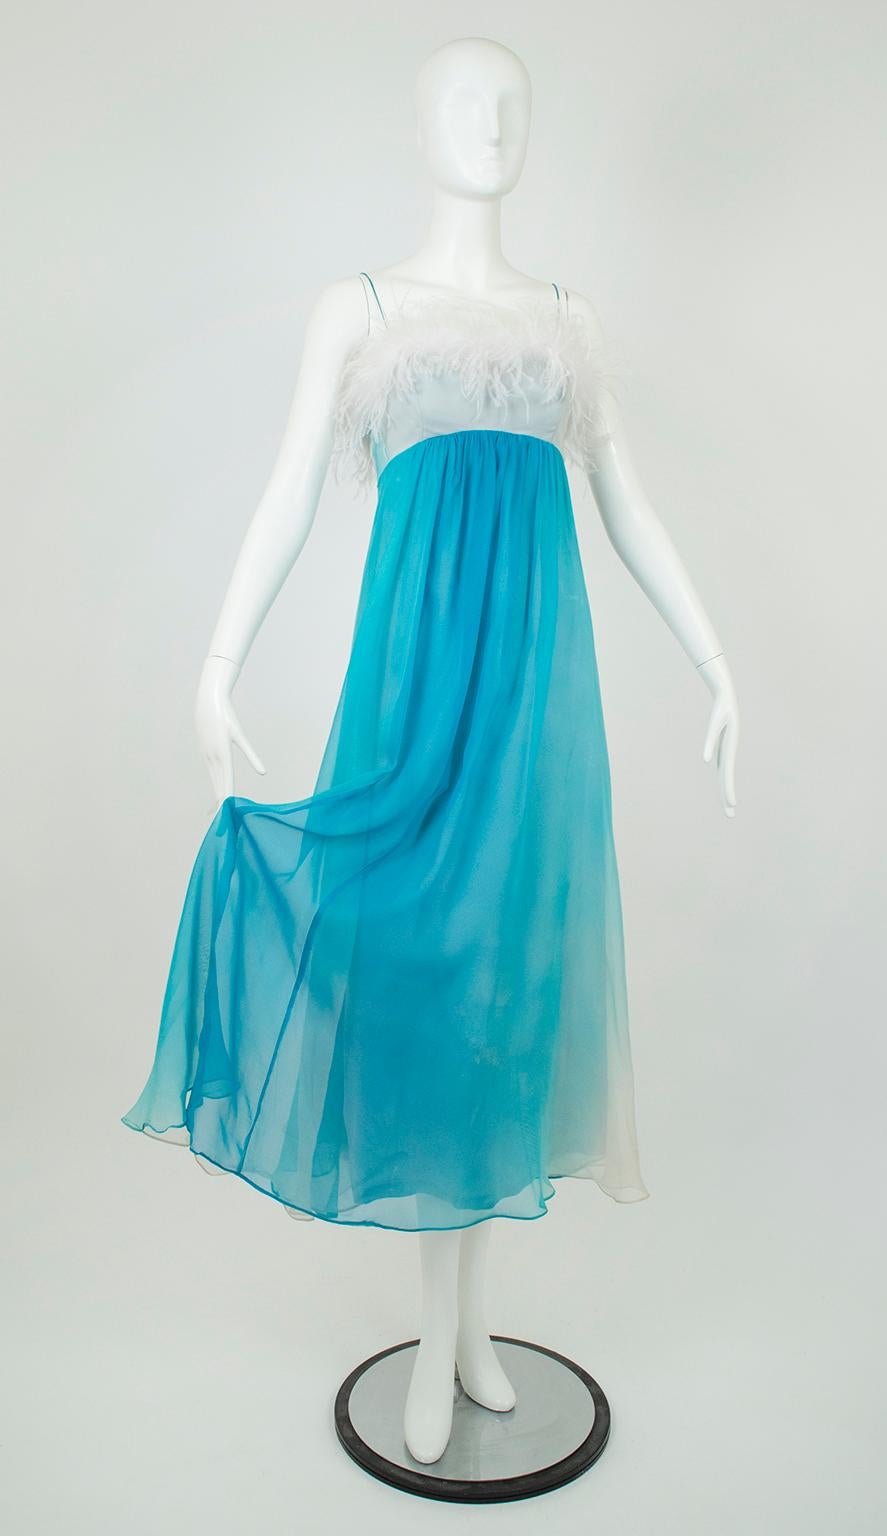 A gown worthy of a dance number with Fred Astaire, this dress has drama by the handful.  Yards of swirling chiffon and feathers provide nonstop movement, while the rich ombré tye dye effect creates pools of depth.  If movie star glamour is your